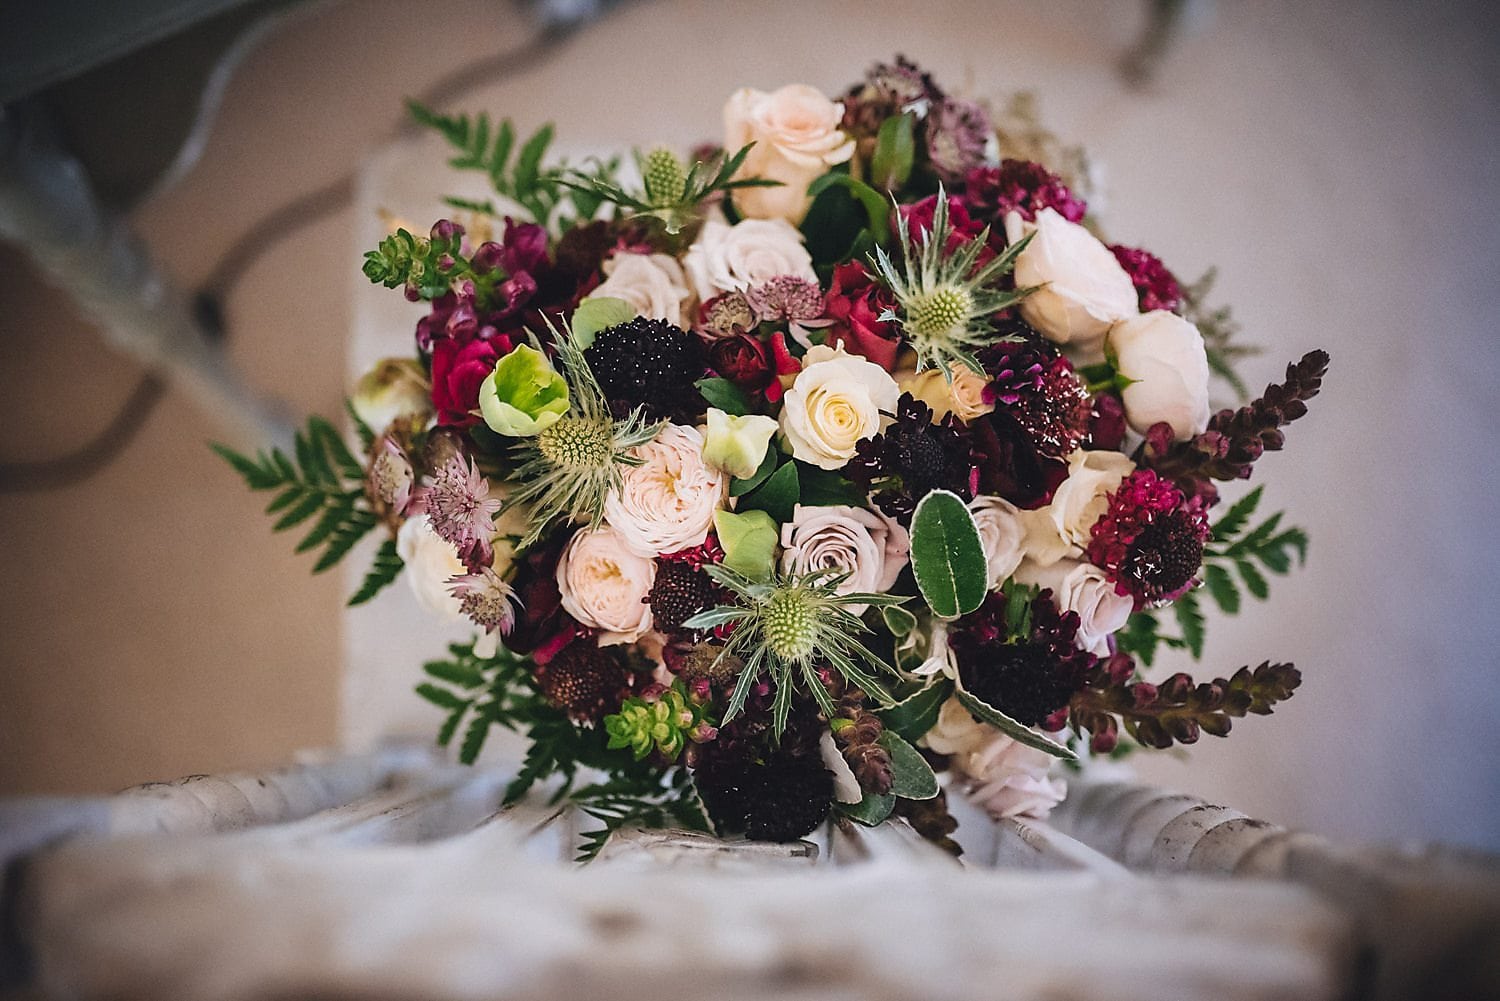 The bridal bouquet by Wild Willow Flowers. Featuring deep plums and pale pinks